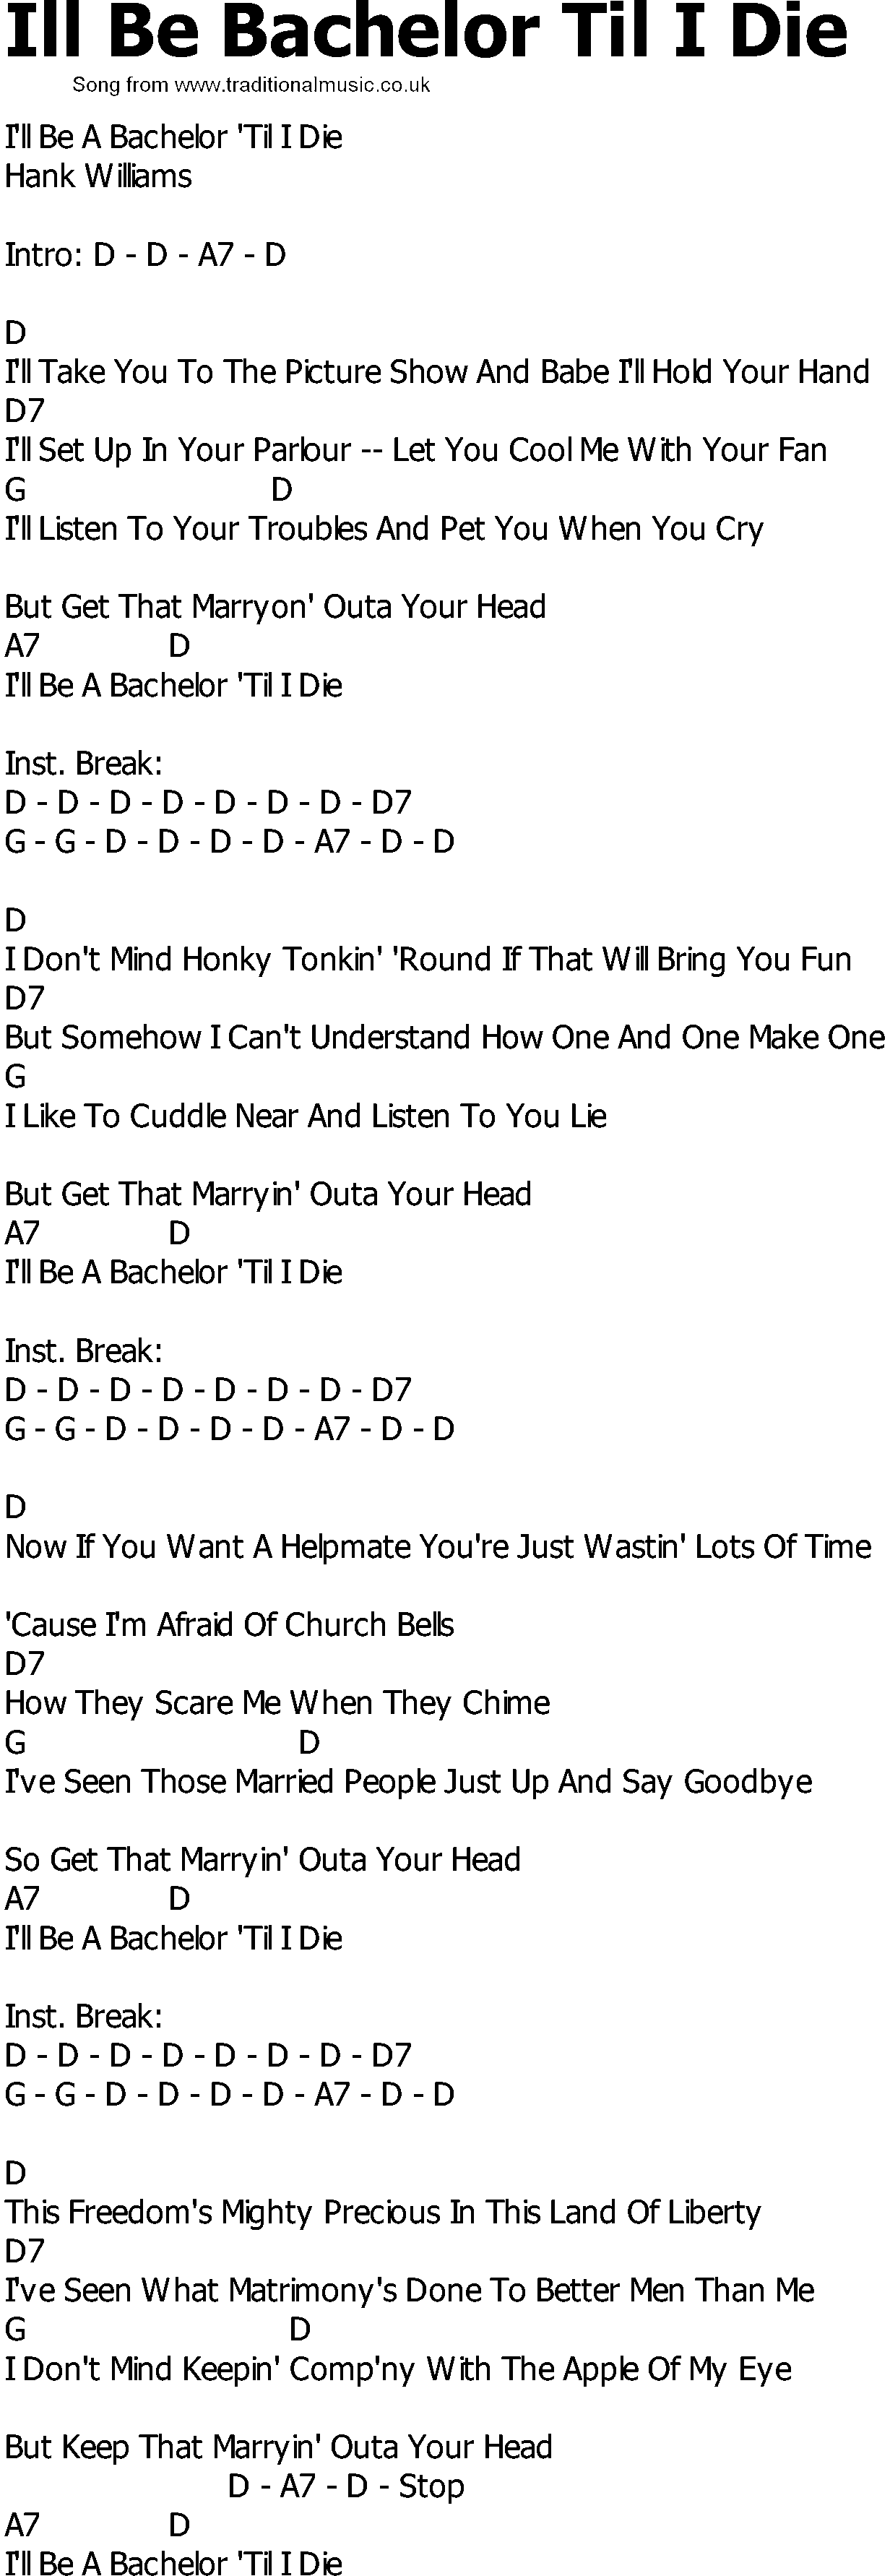 Old Country song lyrics with chords - Ill Be Bachelor Til I Die